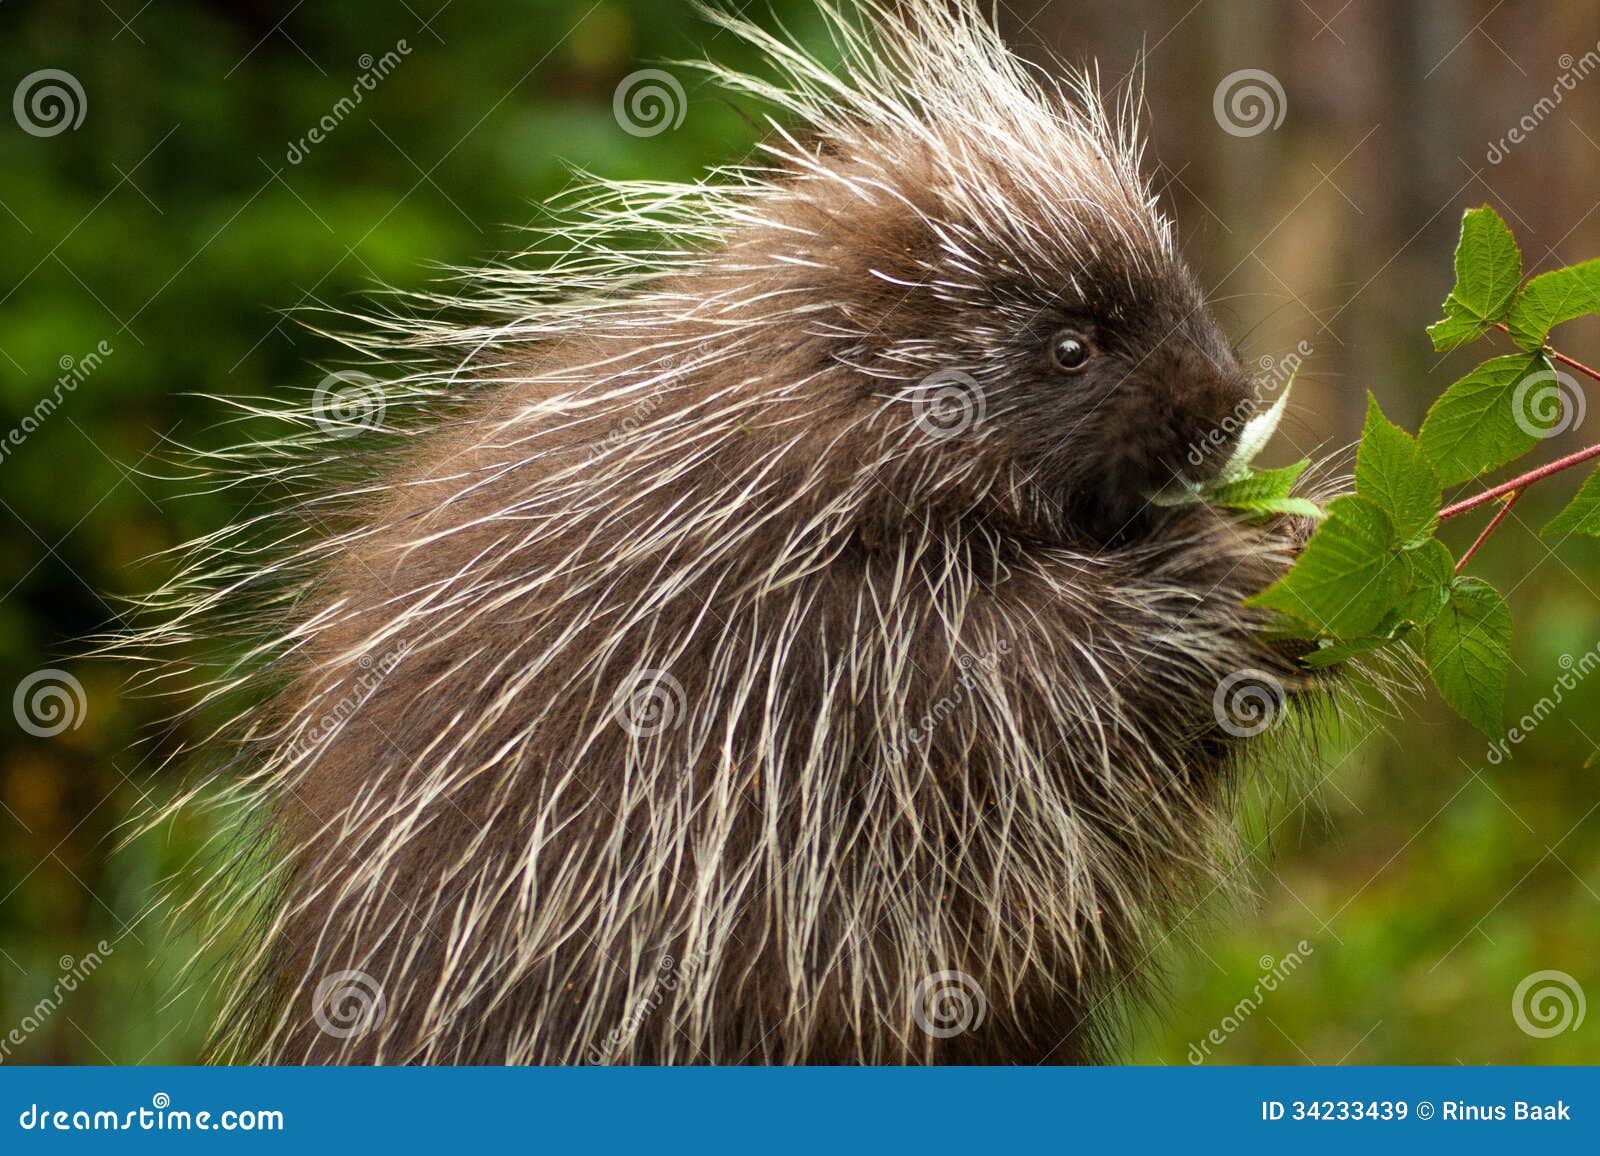 young porcupine